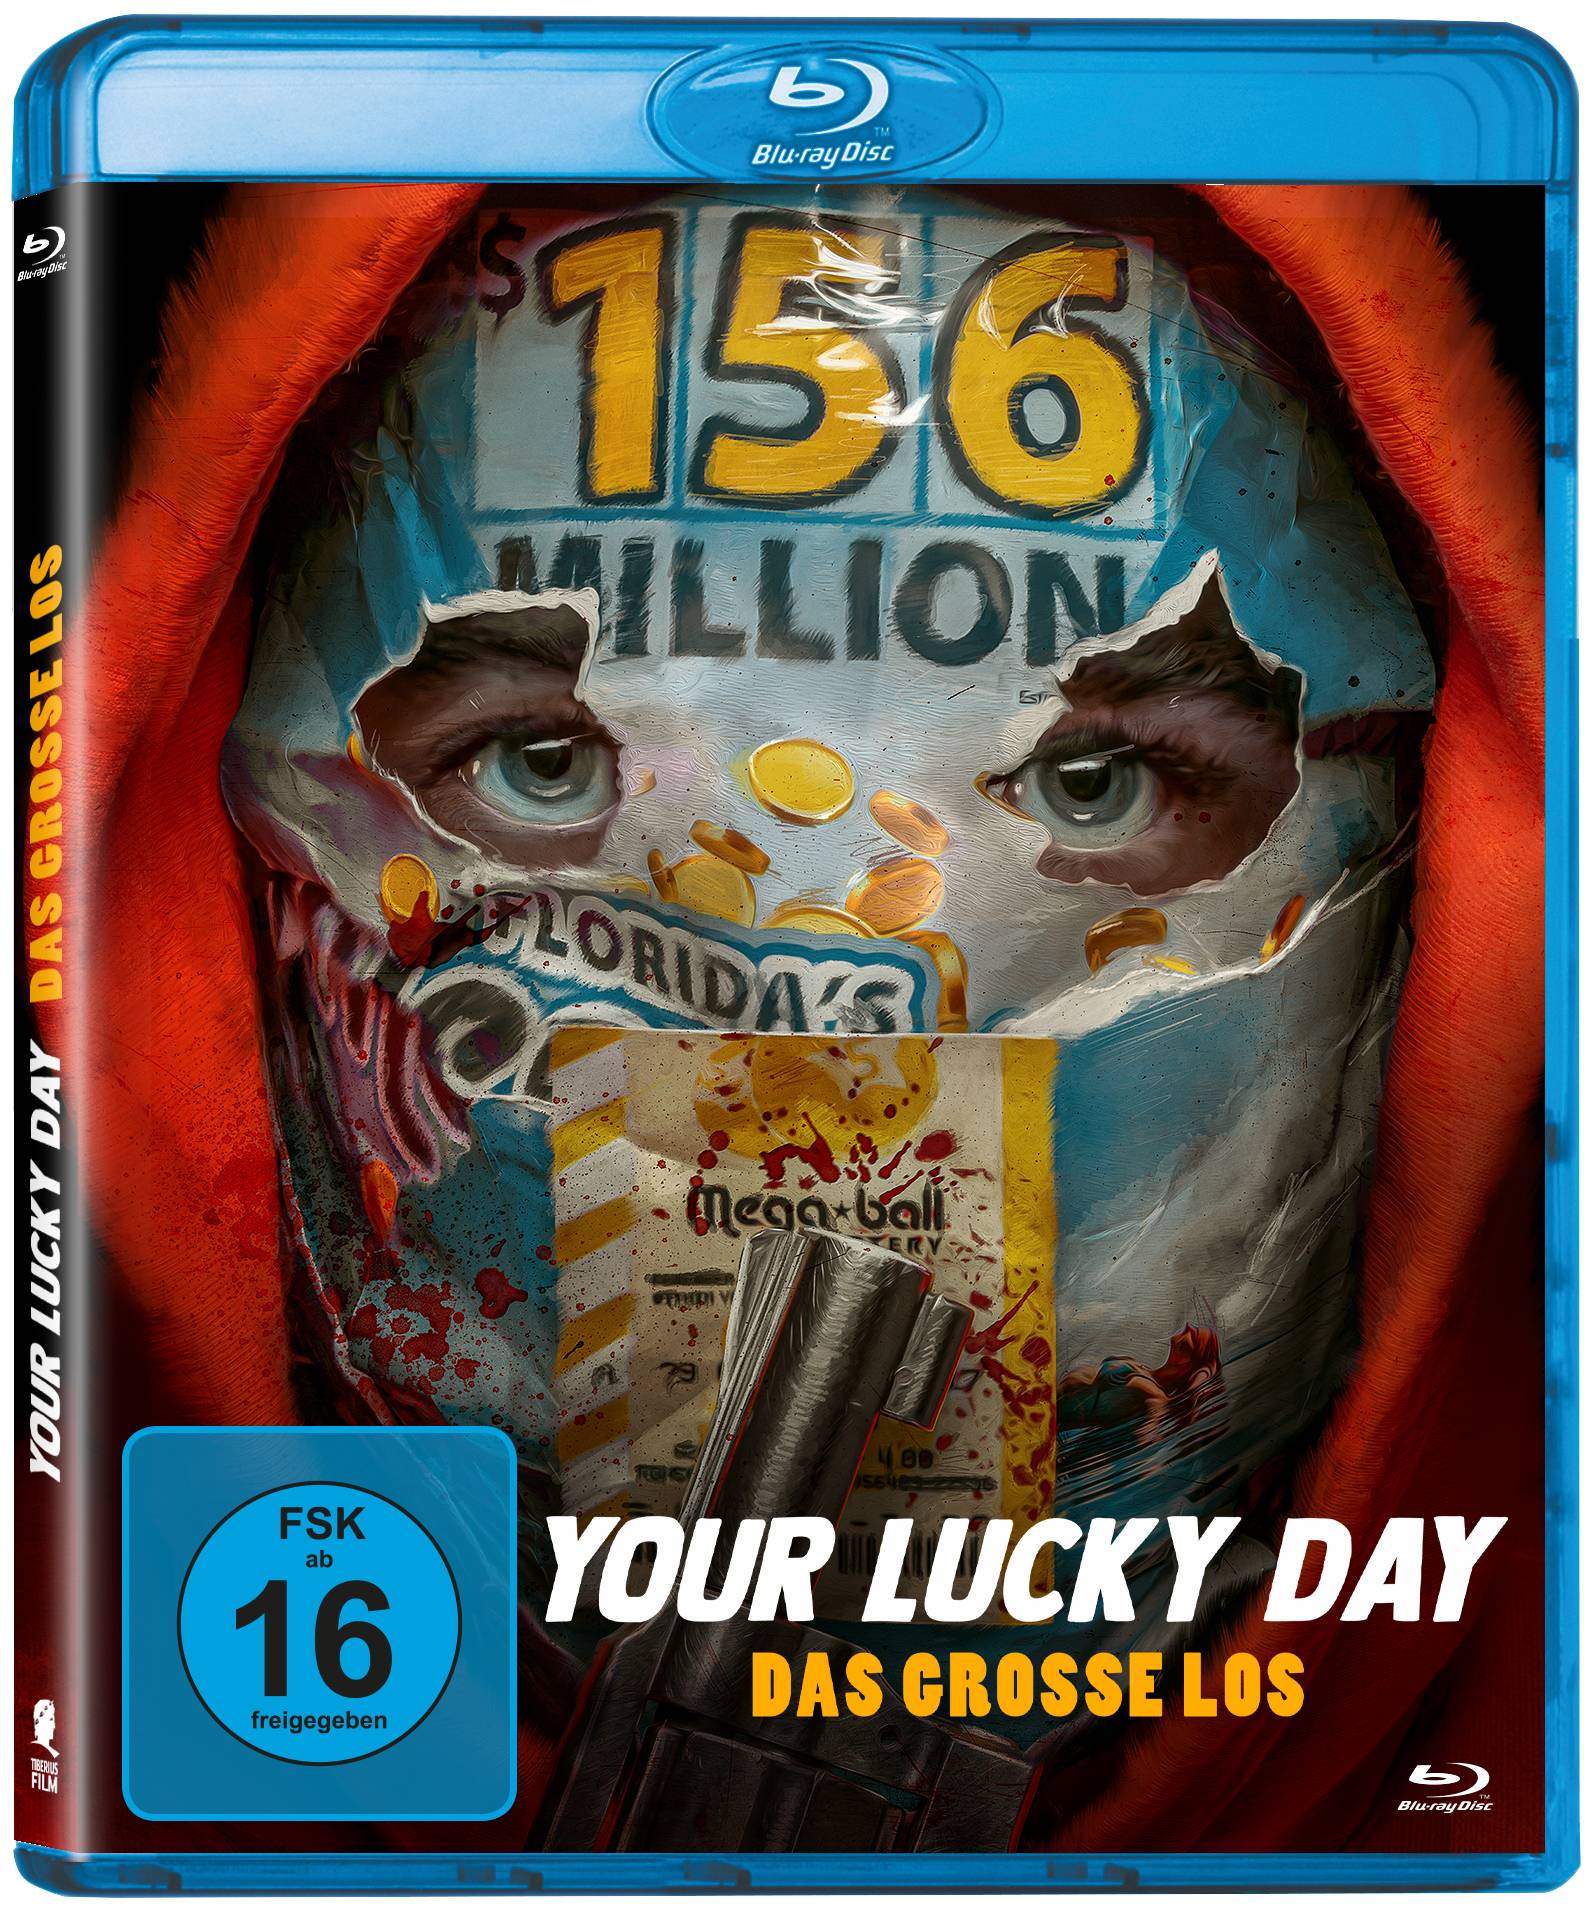 Your Lucky Day - Das große Los